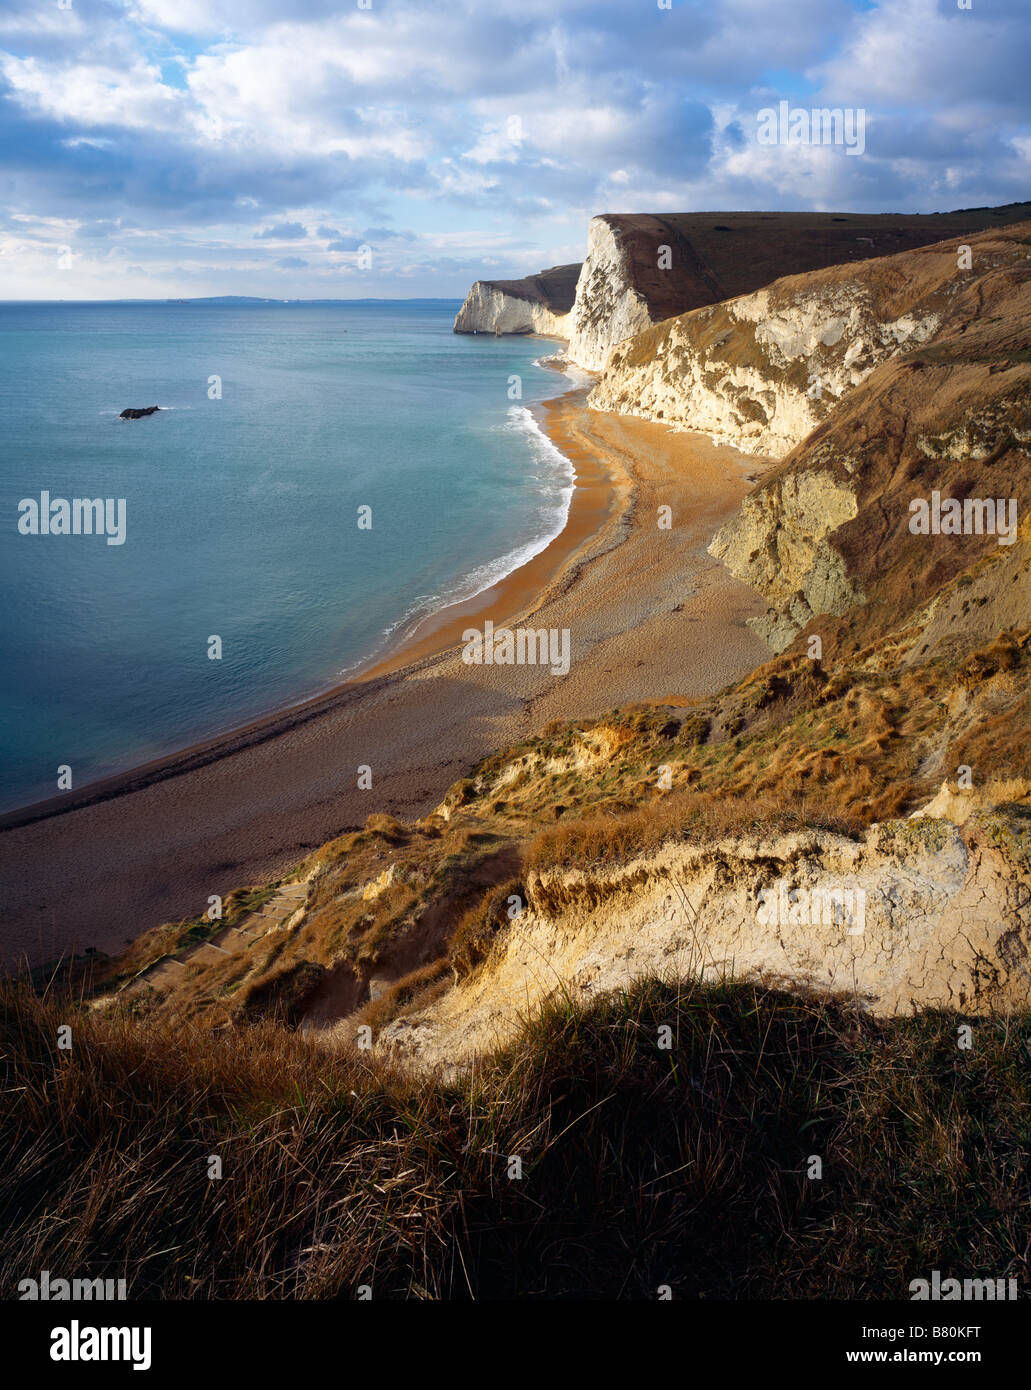 The cliffs of Bats Head and Swyre Head by Durdle Door on the Dorset Jurassic Coast, West Lulworth, Dorset, England Stock Photo